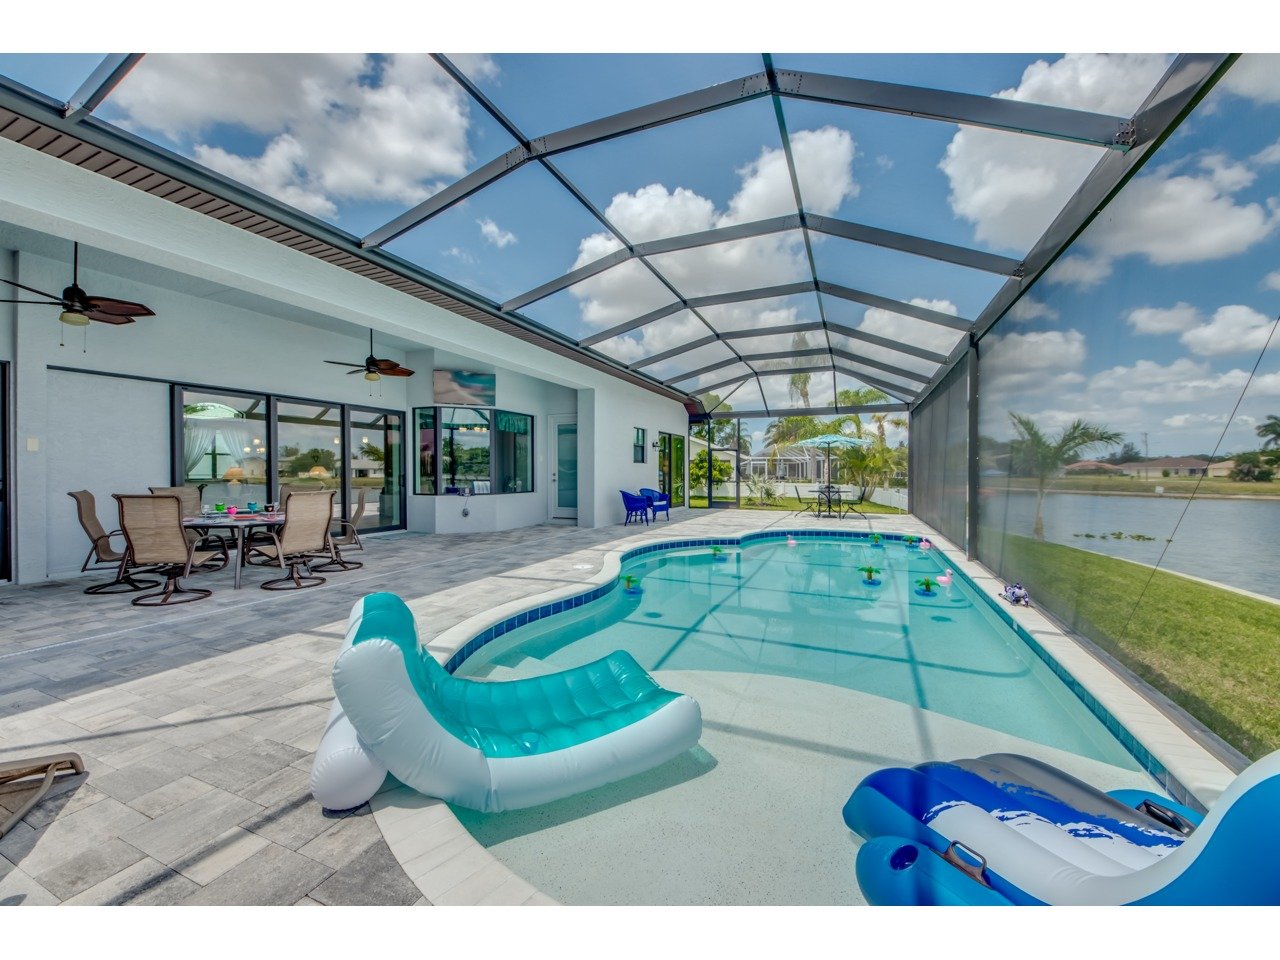 3 bedroom vacation rental with heated pool